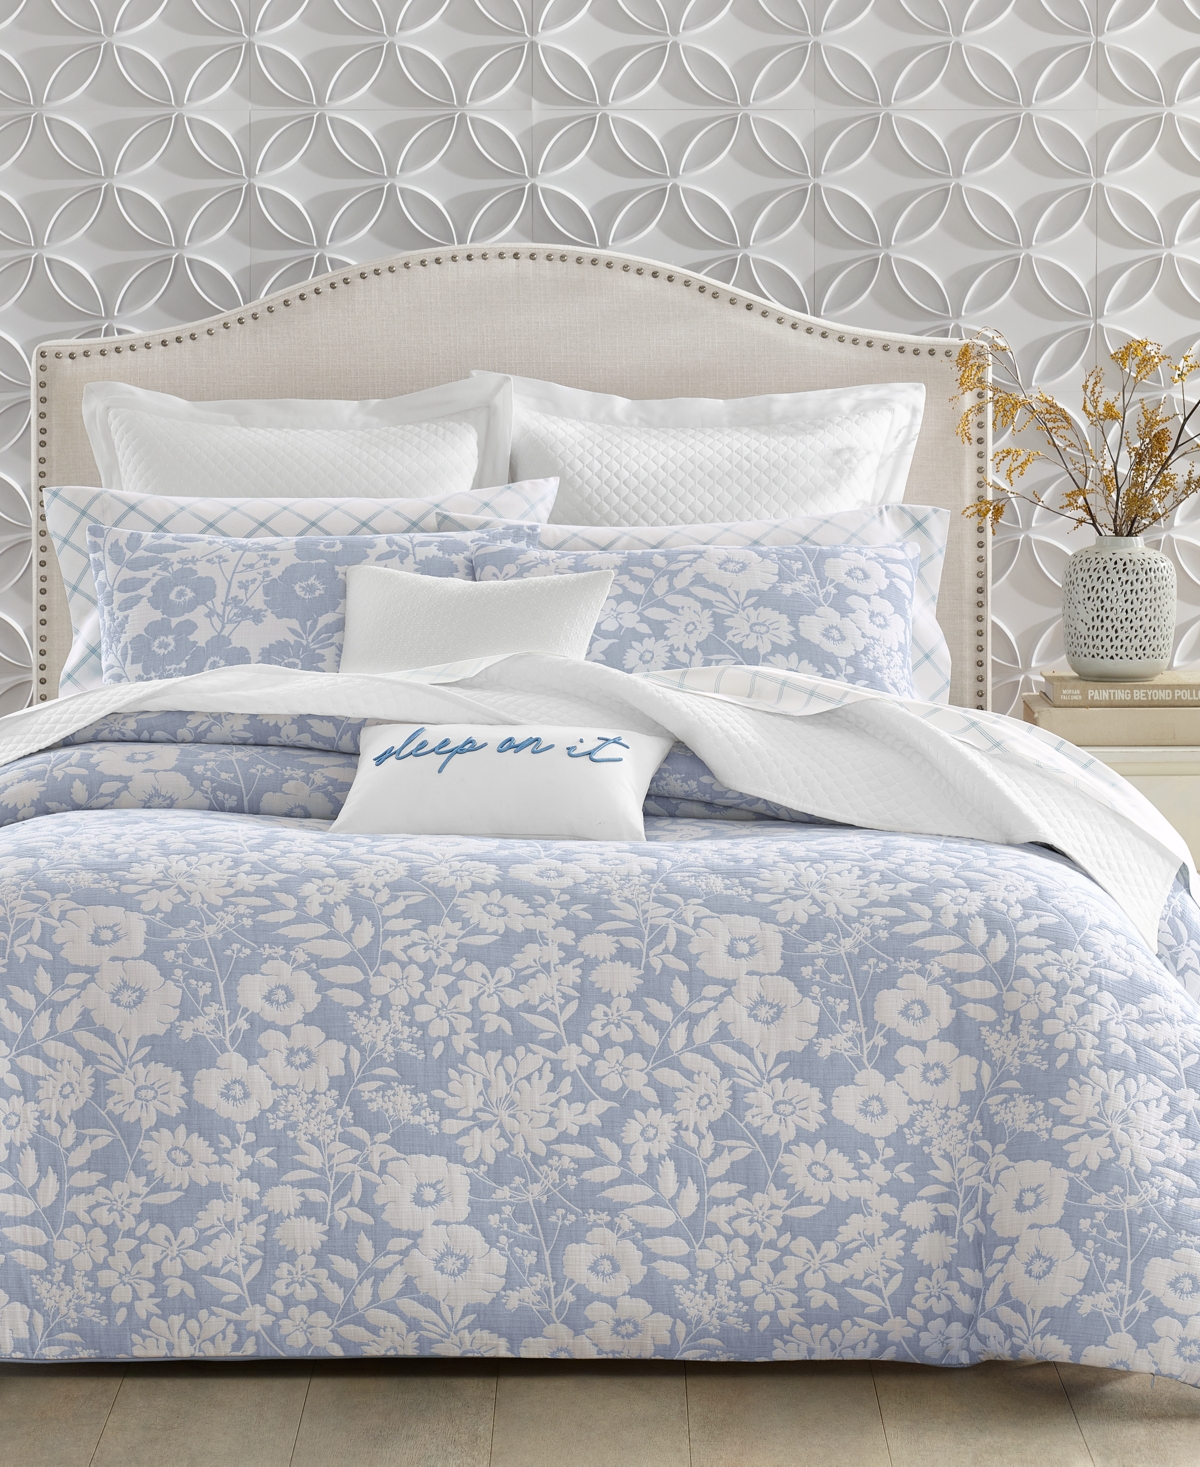 Charter Club Silhouette Floral 2-pc. Comforter Set, Twin, Created For Macy's In Blue